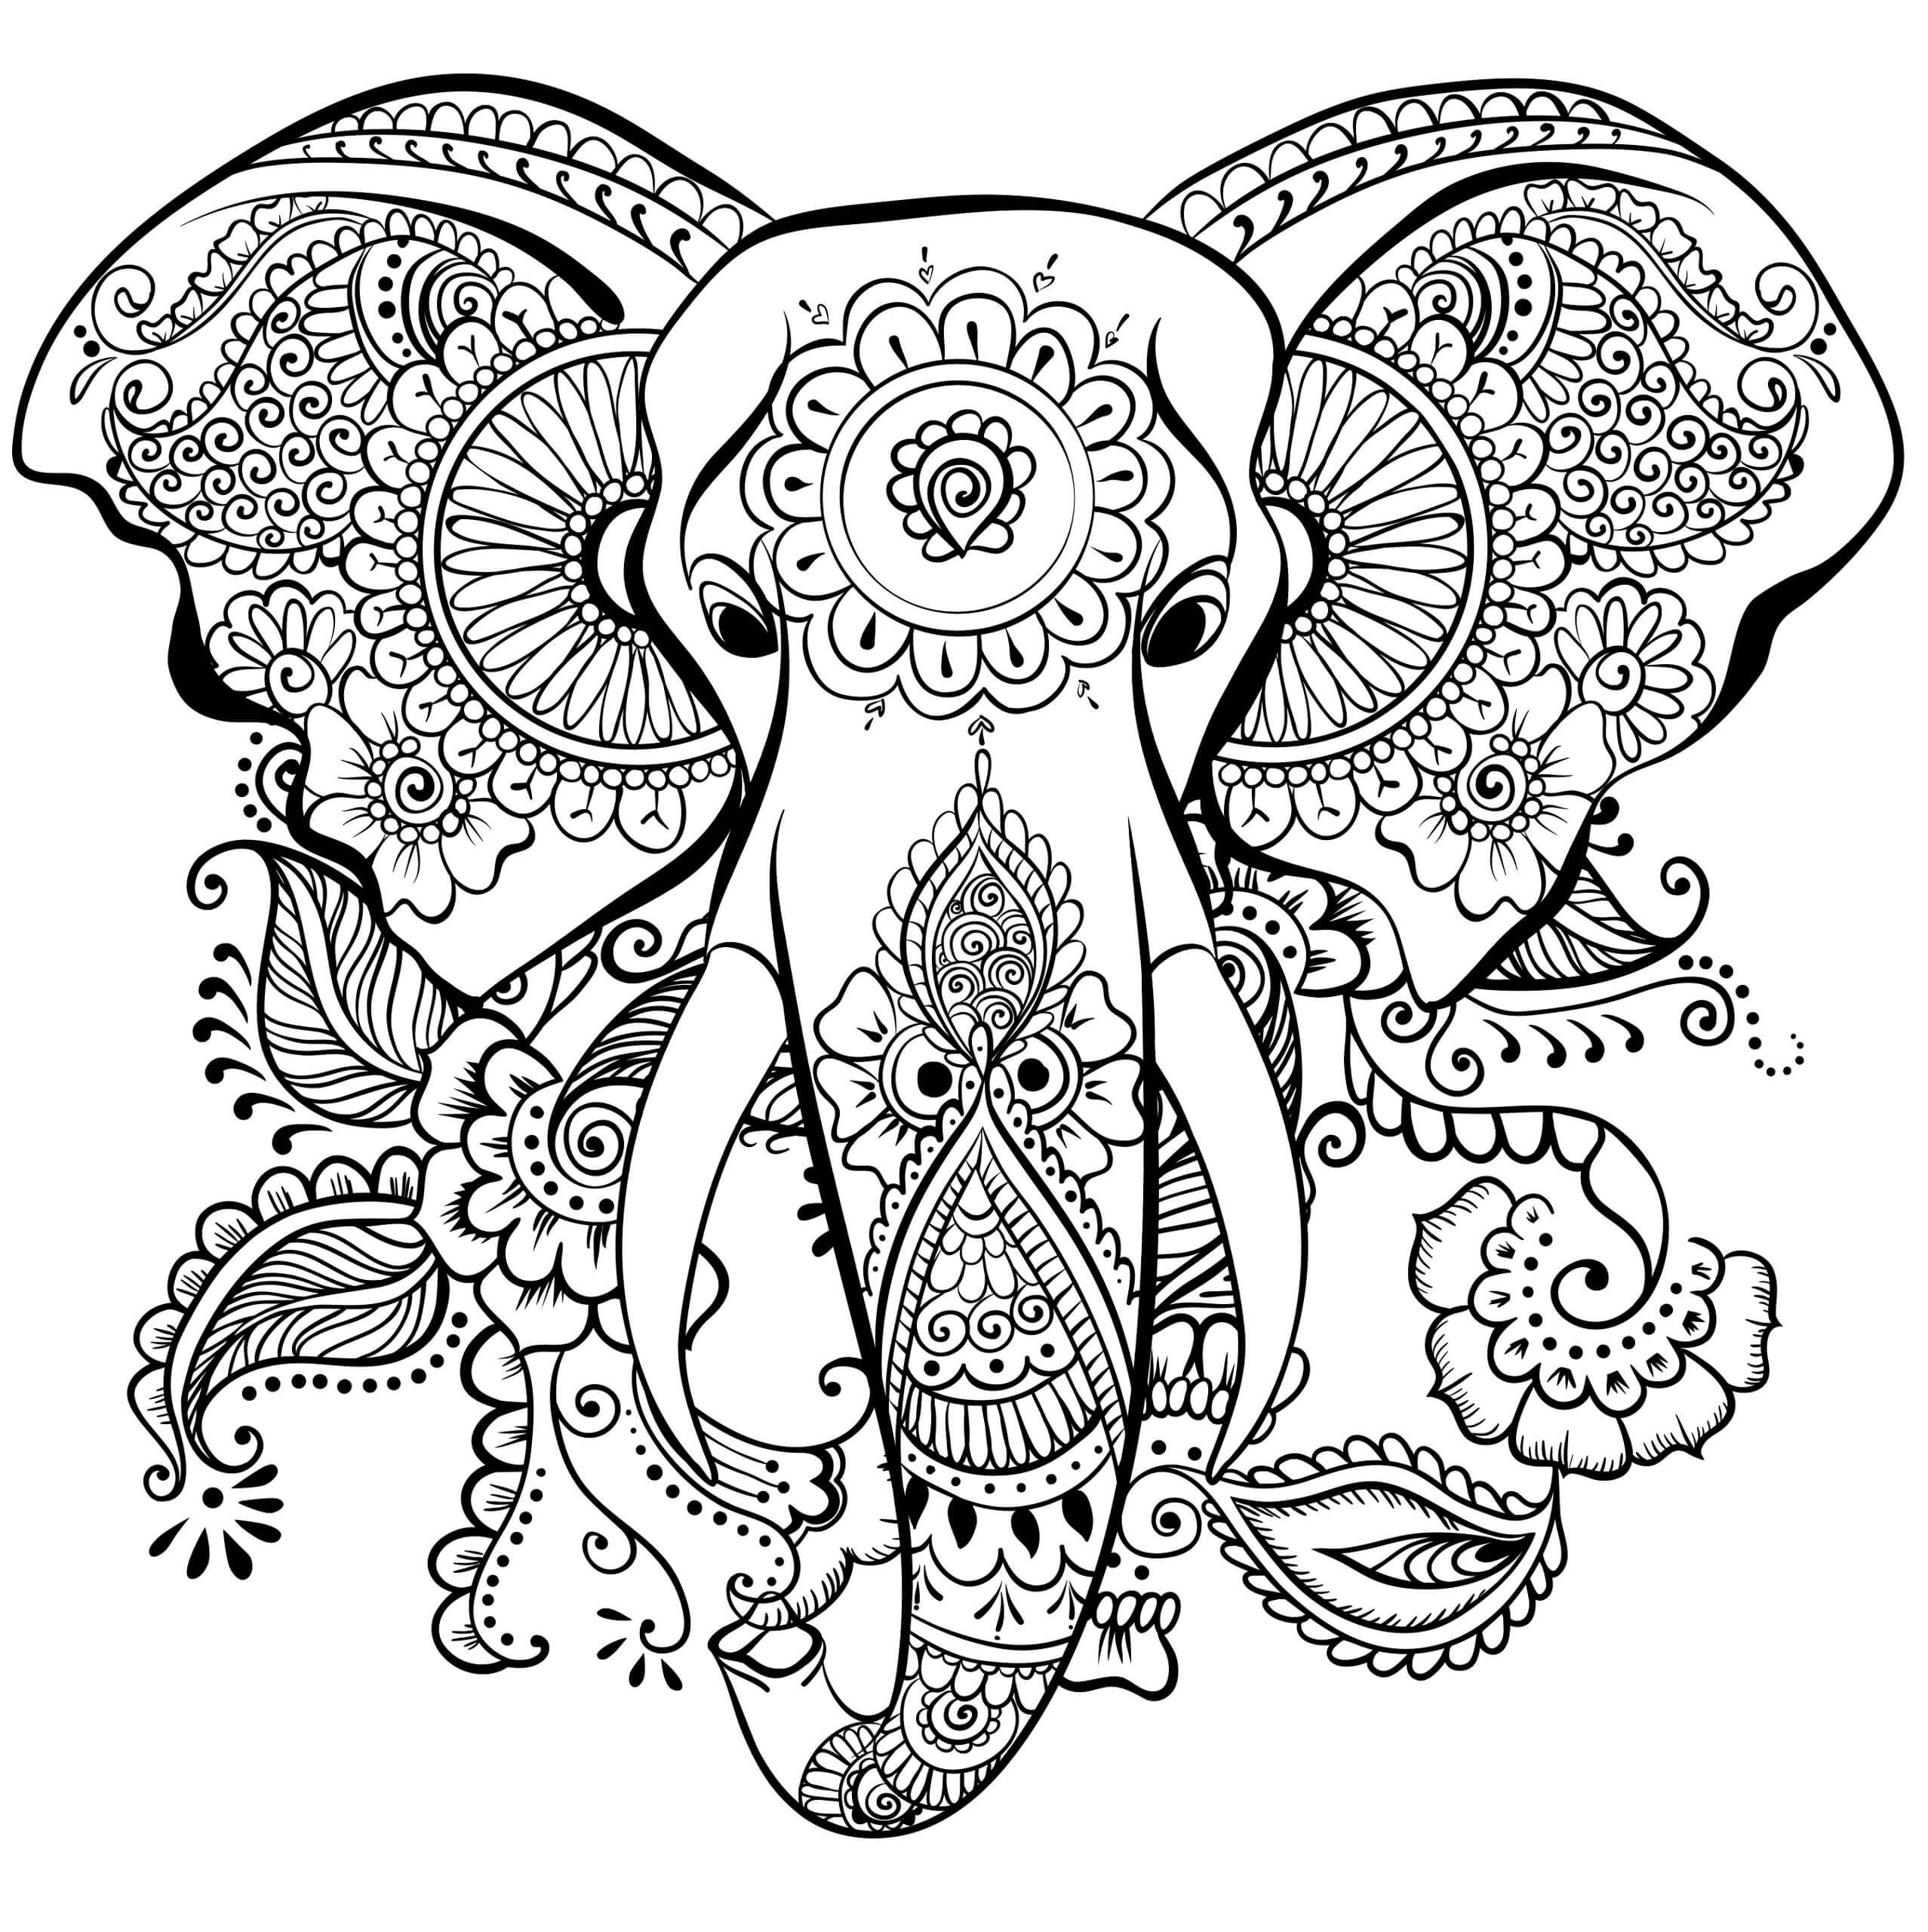 Difficult Coloring Pages For Adults
 Coloring Pages For Adults Difficult Animals 7